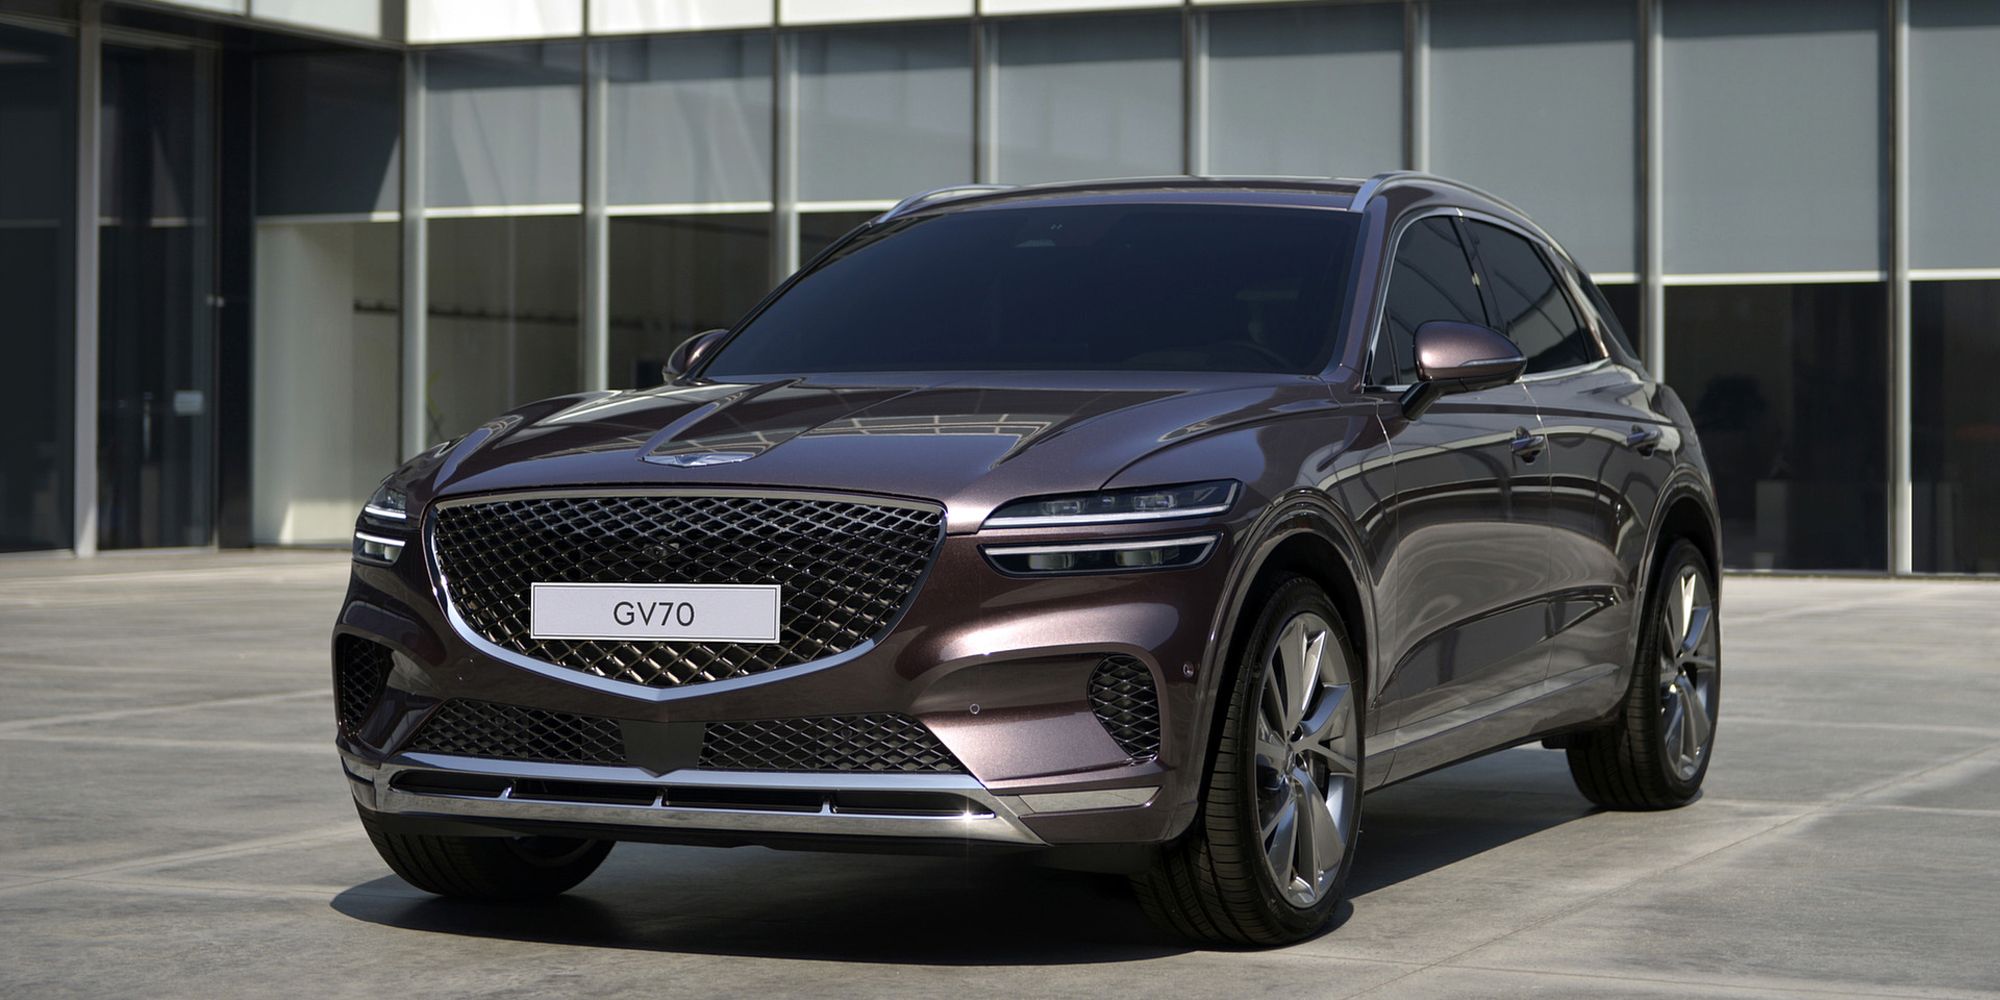 The front of the new Genesis GV70